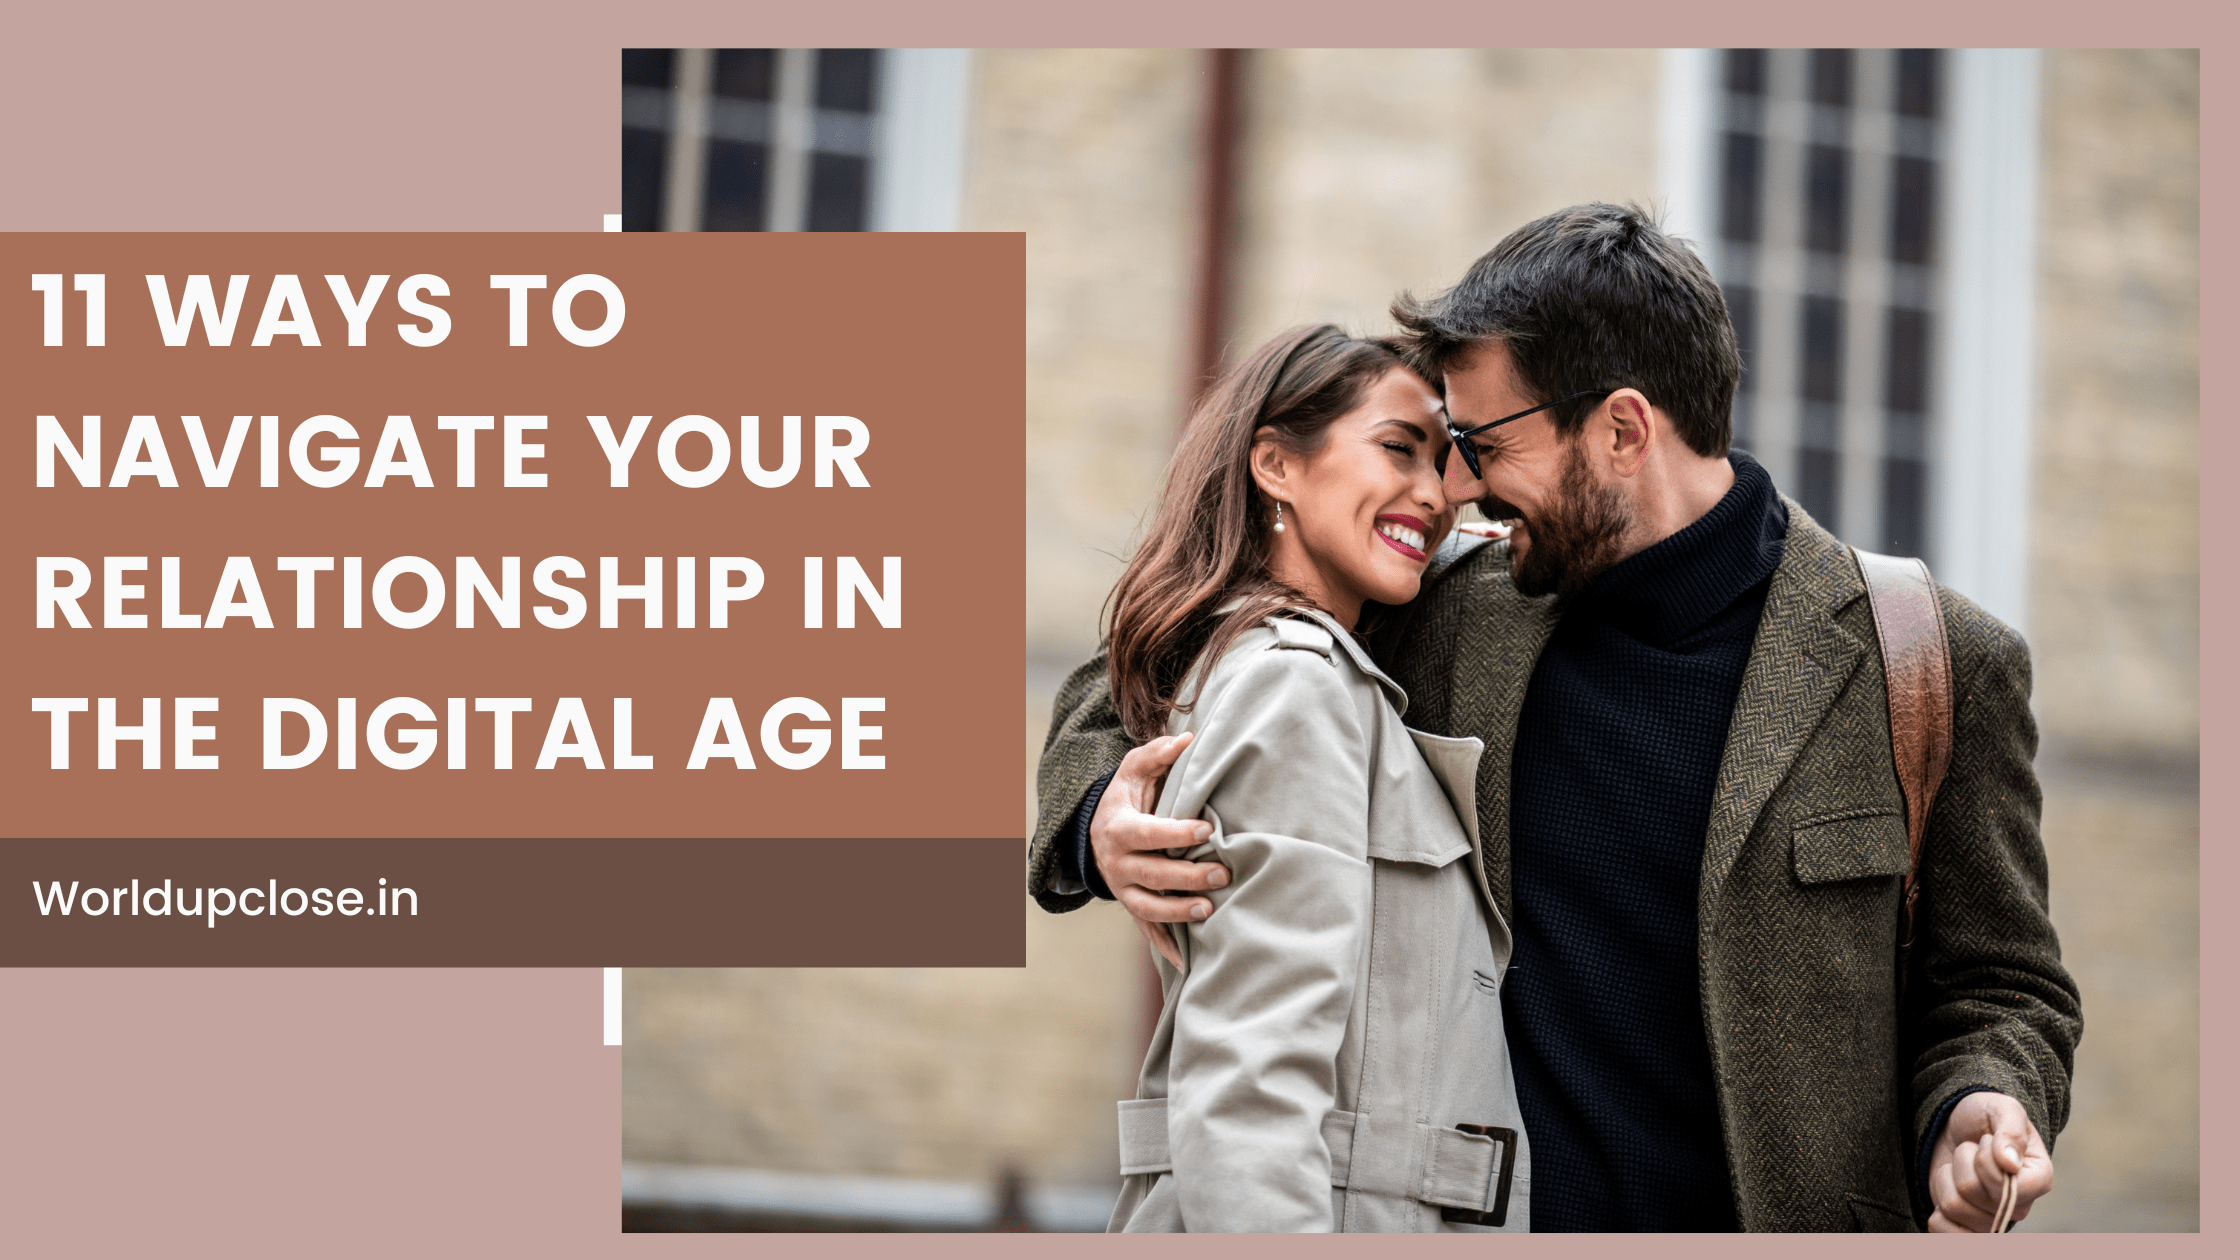 11 Ways to navigate your relationship in the digital age 6